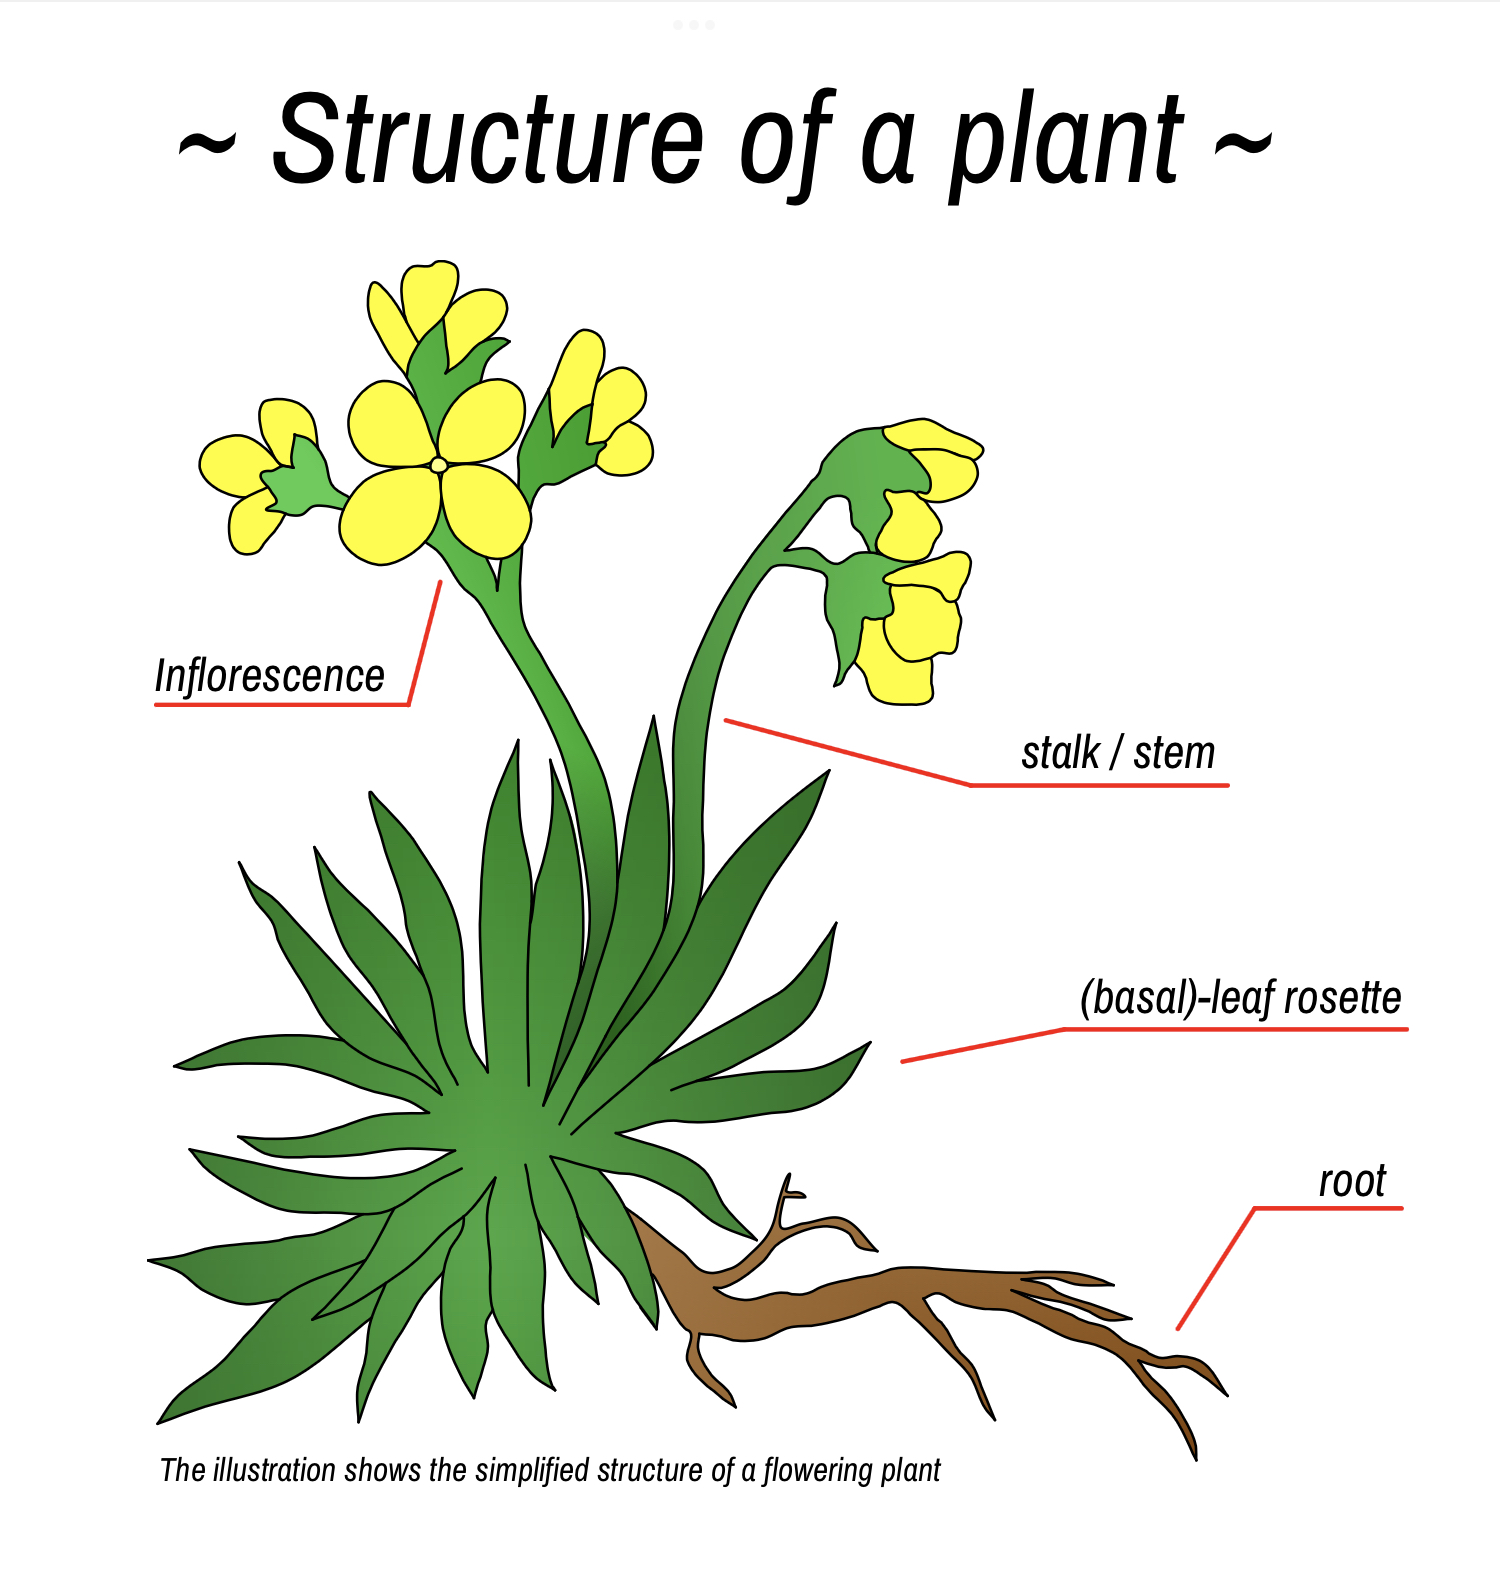 the terminology for the structure of a plant